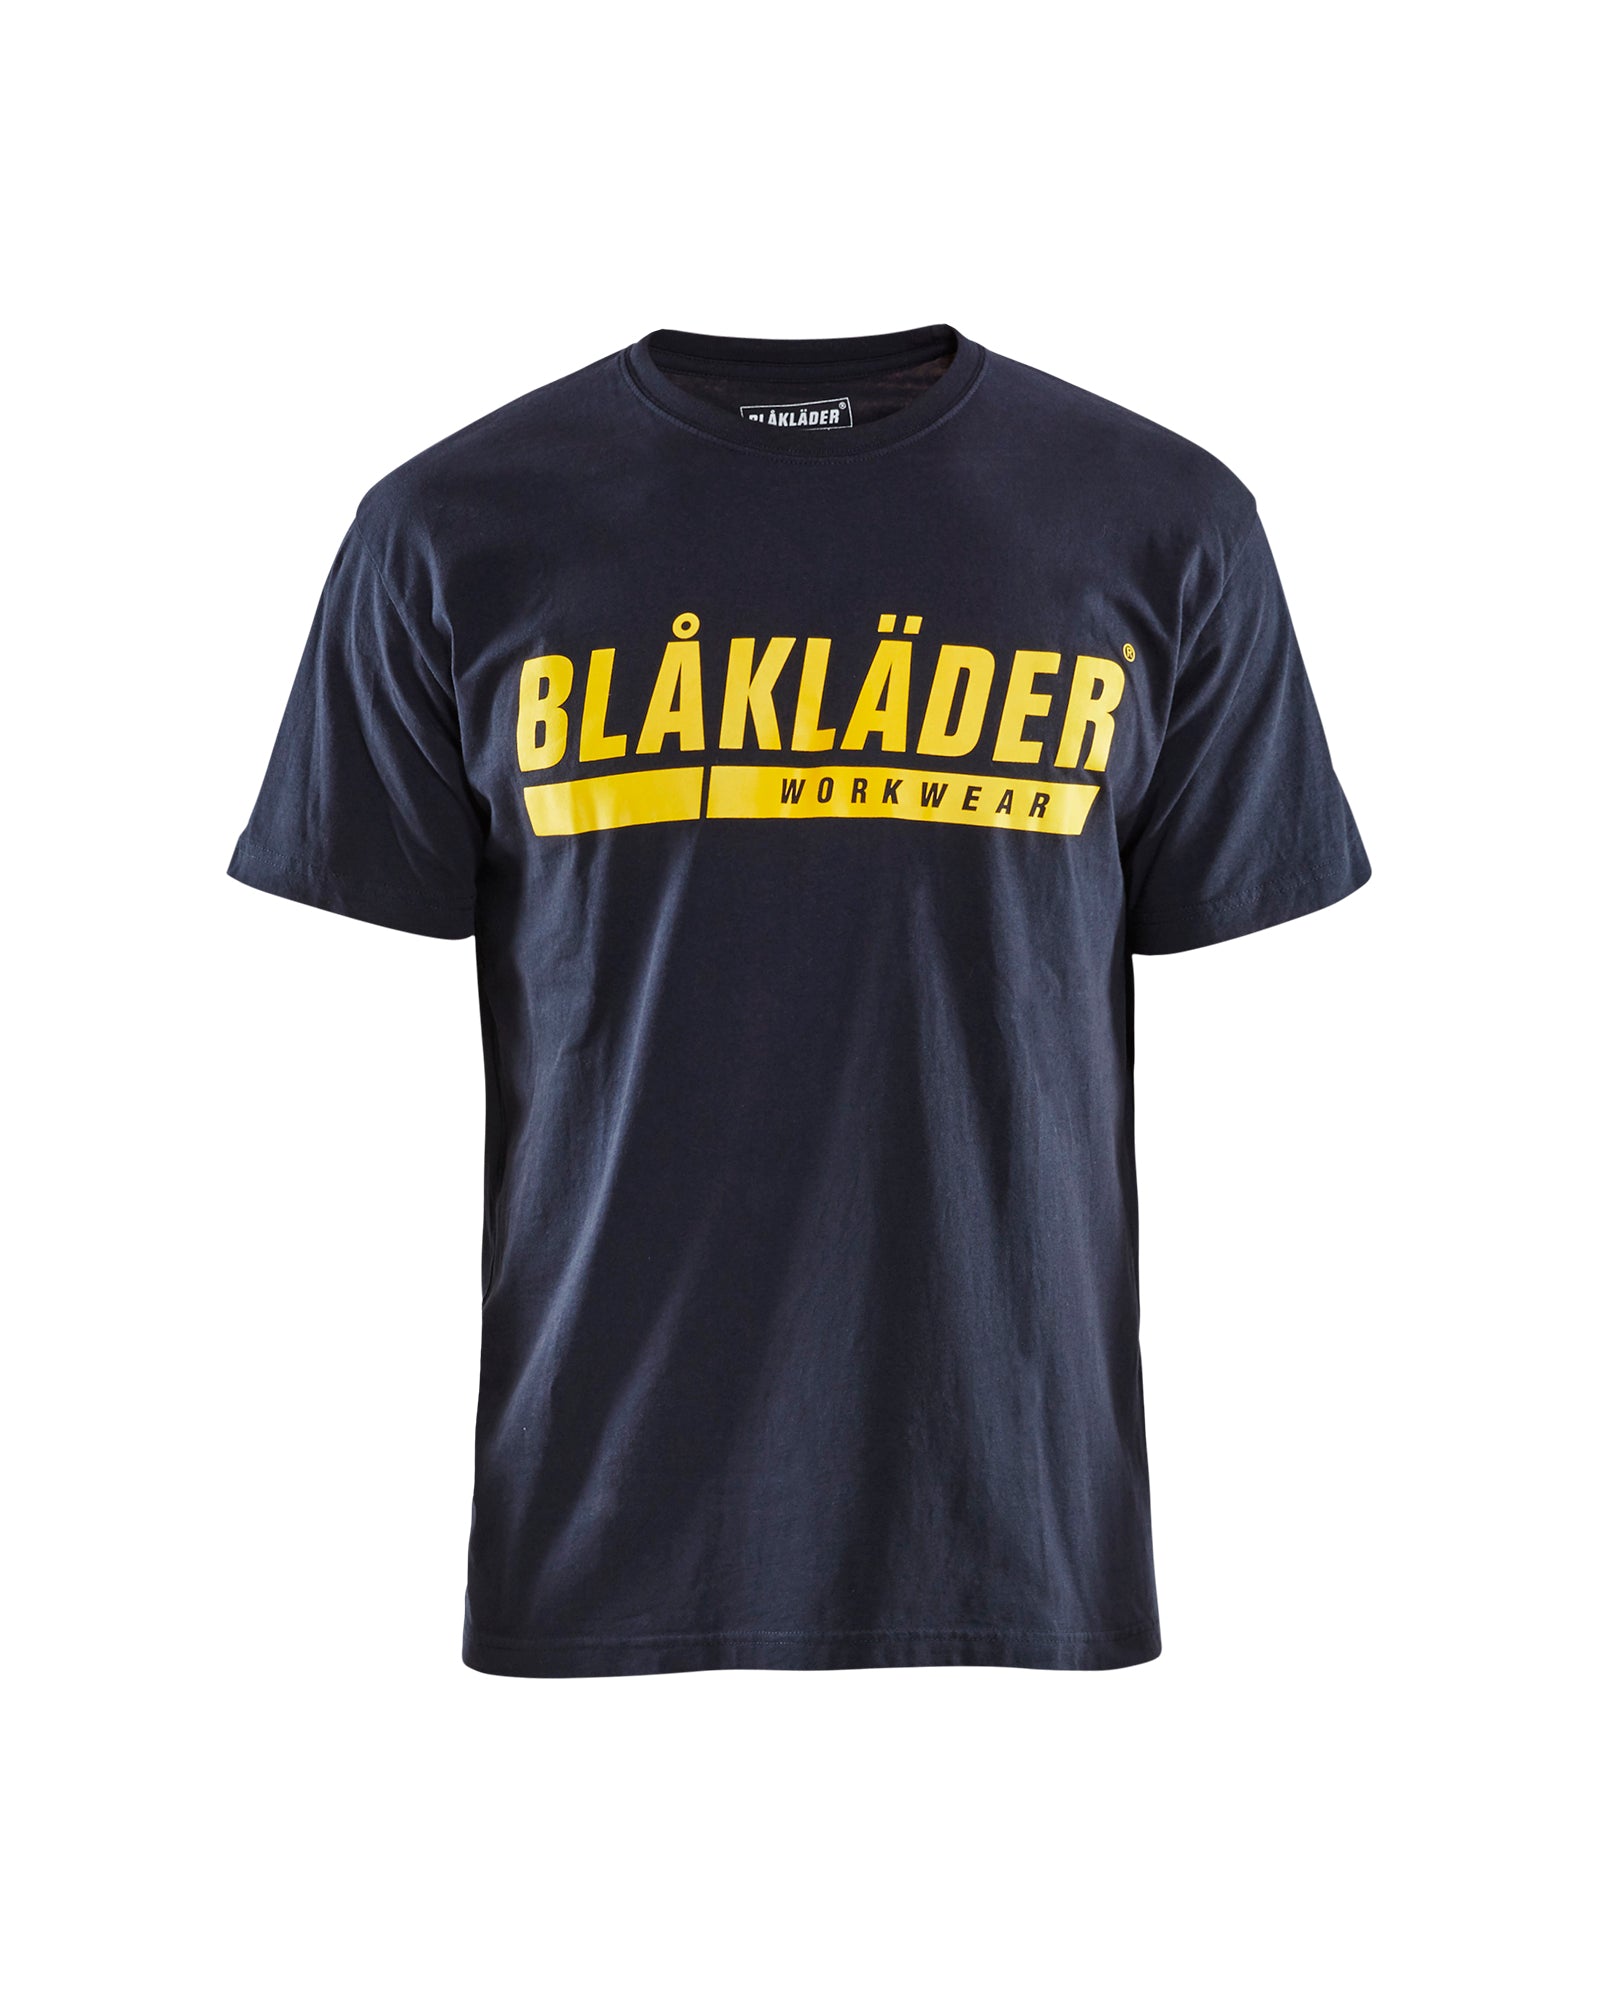 Men's Blaklader US Short Sleeves with Logo T-Shirt in Navy Blue from the front view